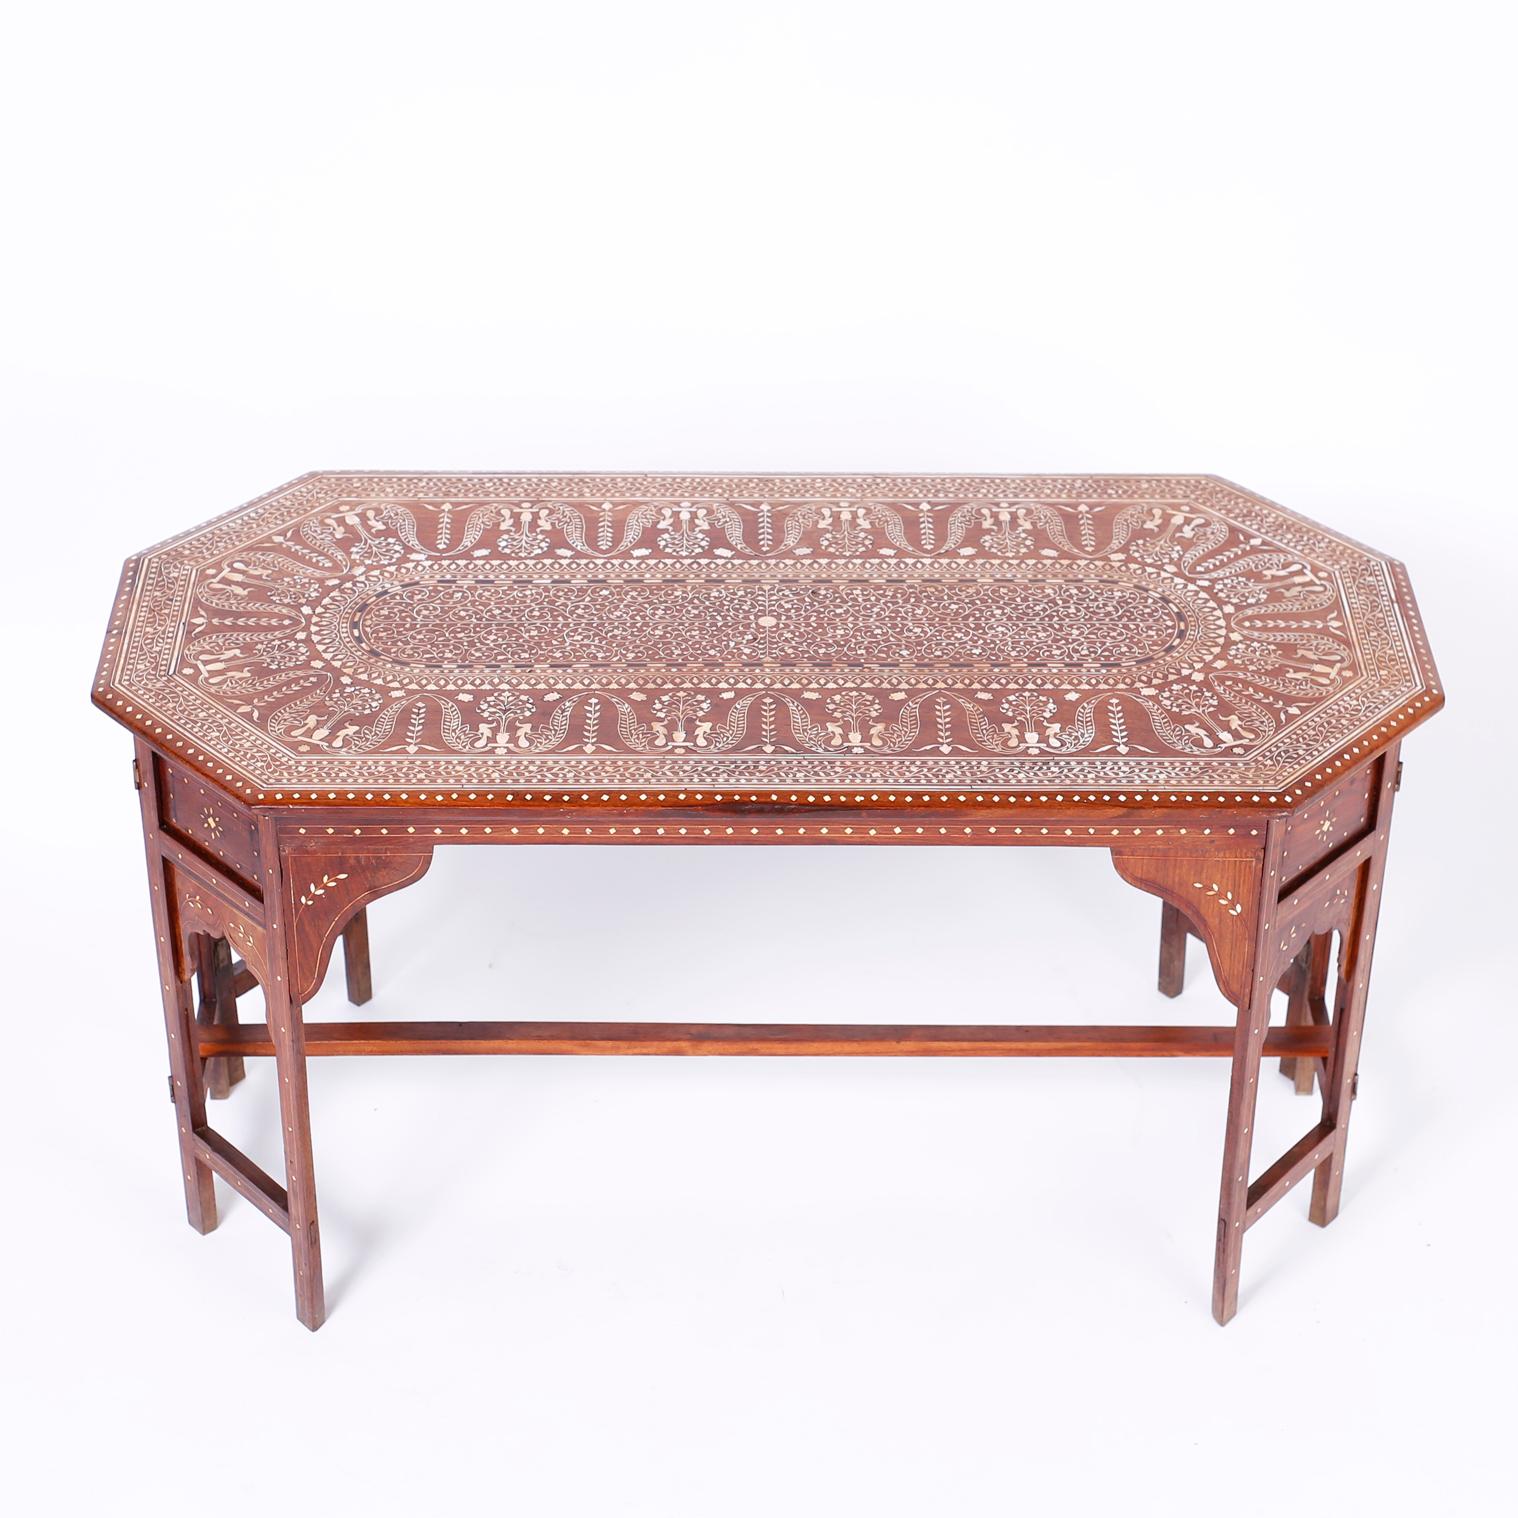 Anglo Indian mahogany coffee table with an elongated octagon form, featuring a top having a center panel with elaborate inlaid floral bone designs emanating from a center button inside repeating graceful tree of life designs. The base has eight legs